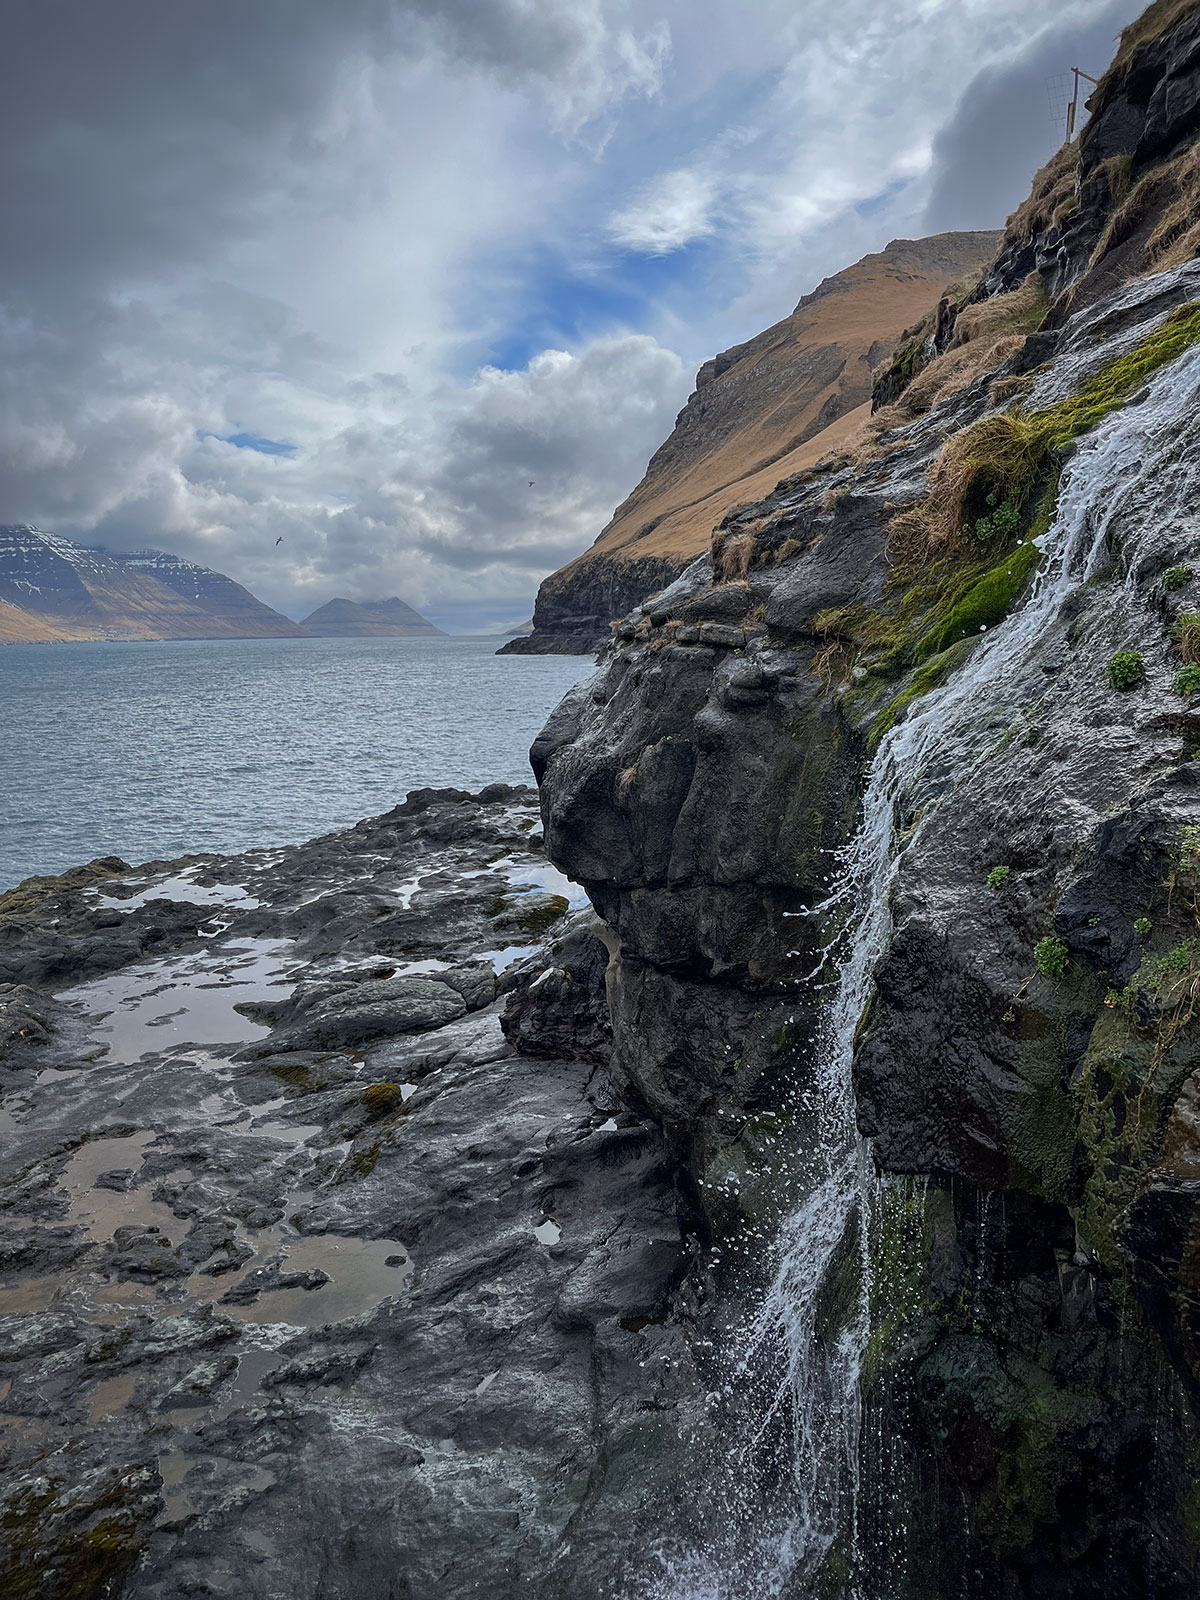 This serene image captures the tranquil beauty of a small waterfall on Kalsoy Island.